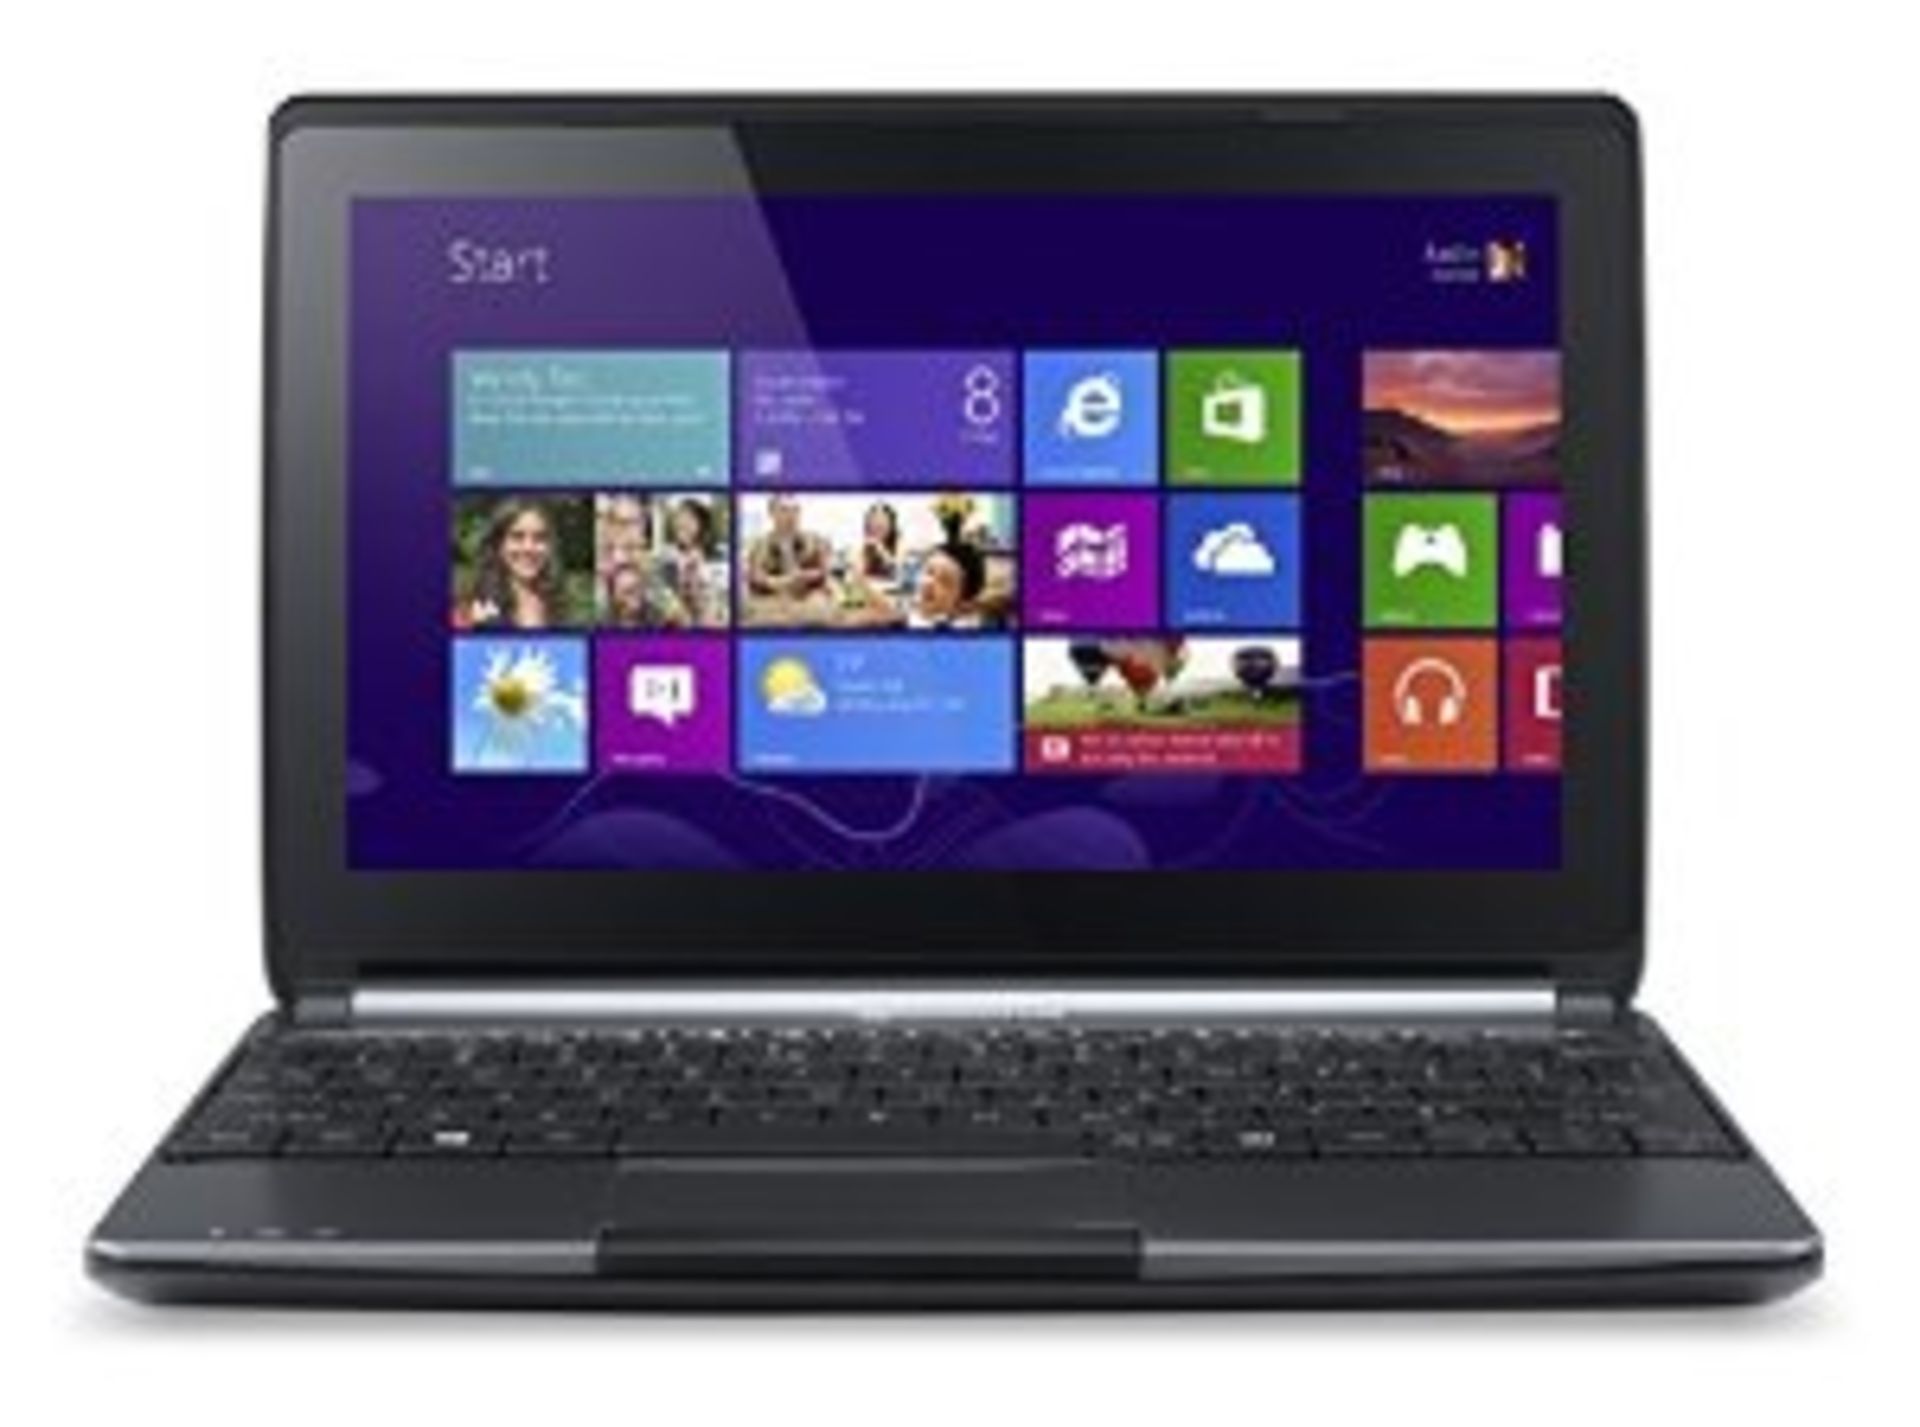 V PACKARD BELL EASYNOTE  10.1 inch TOUCHSCREEN  1.6GHZ  2GB  320GB  WIN 8.1 - Image 2 of 2